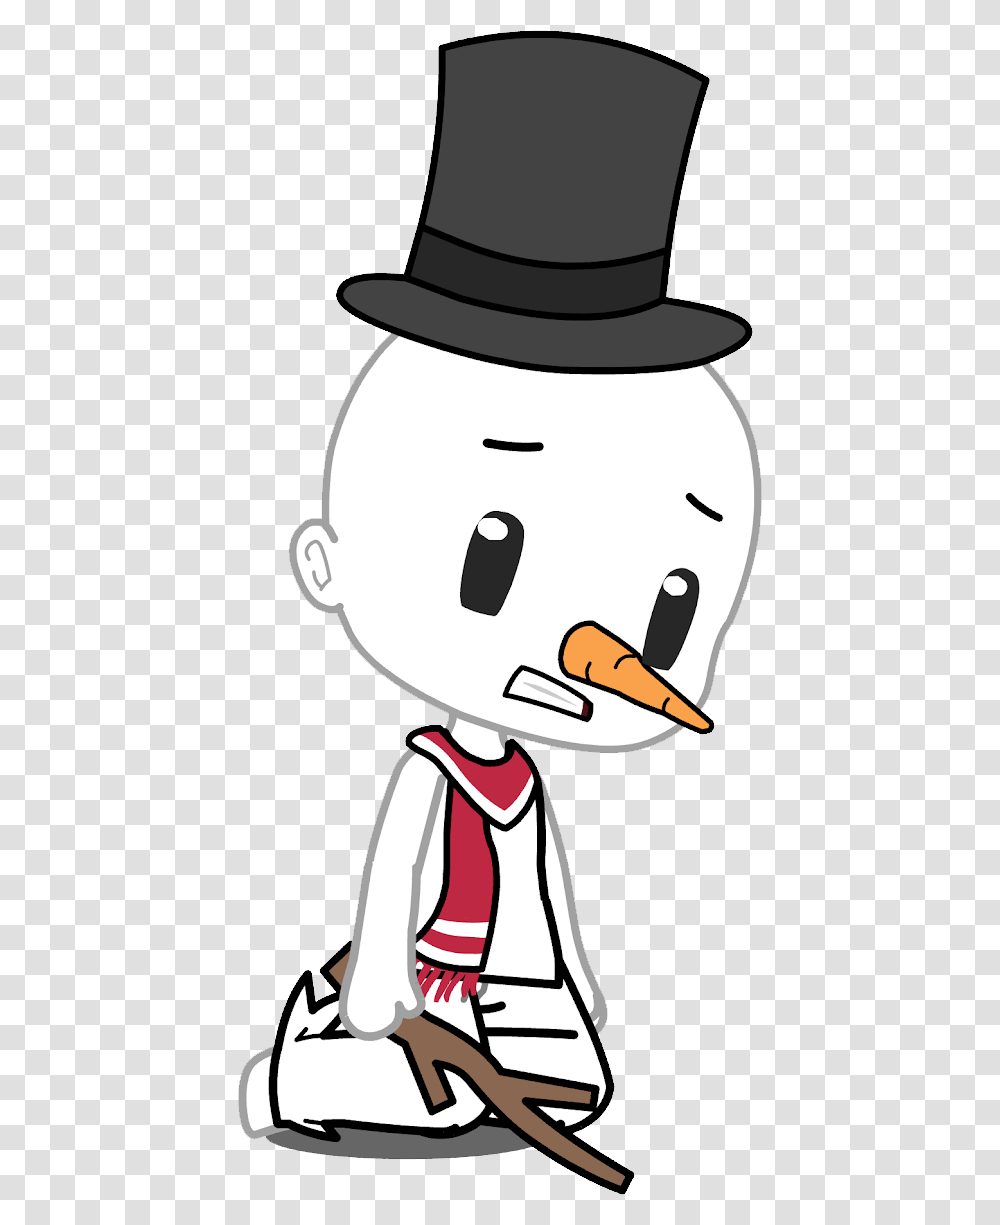 Wiki Frosty Gacha Life, Doodle, Drawing, Stencil Transparent Png